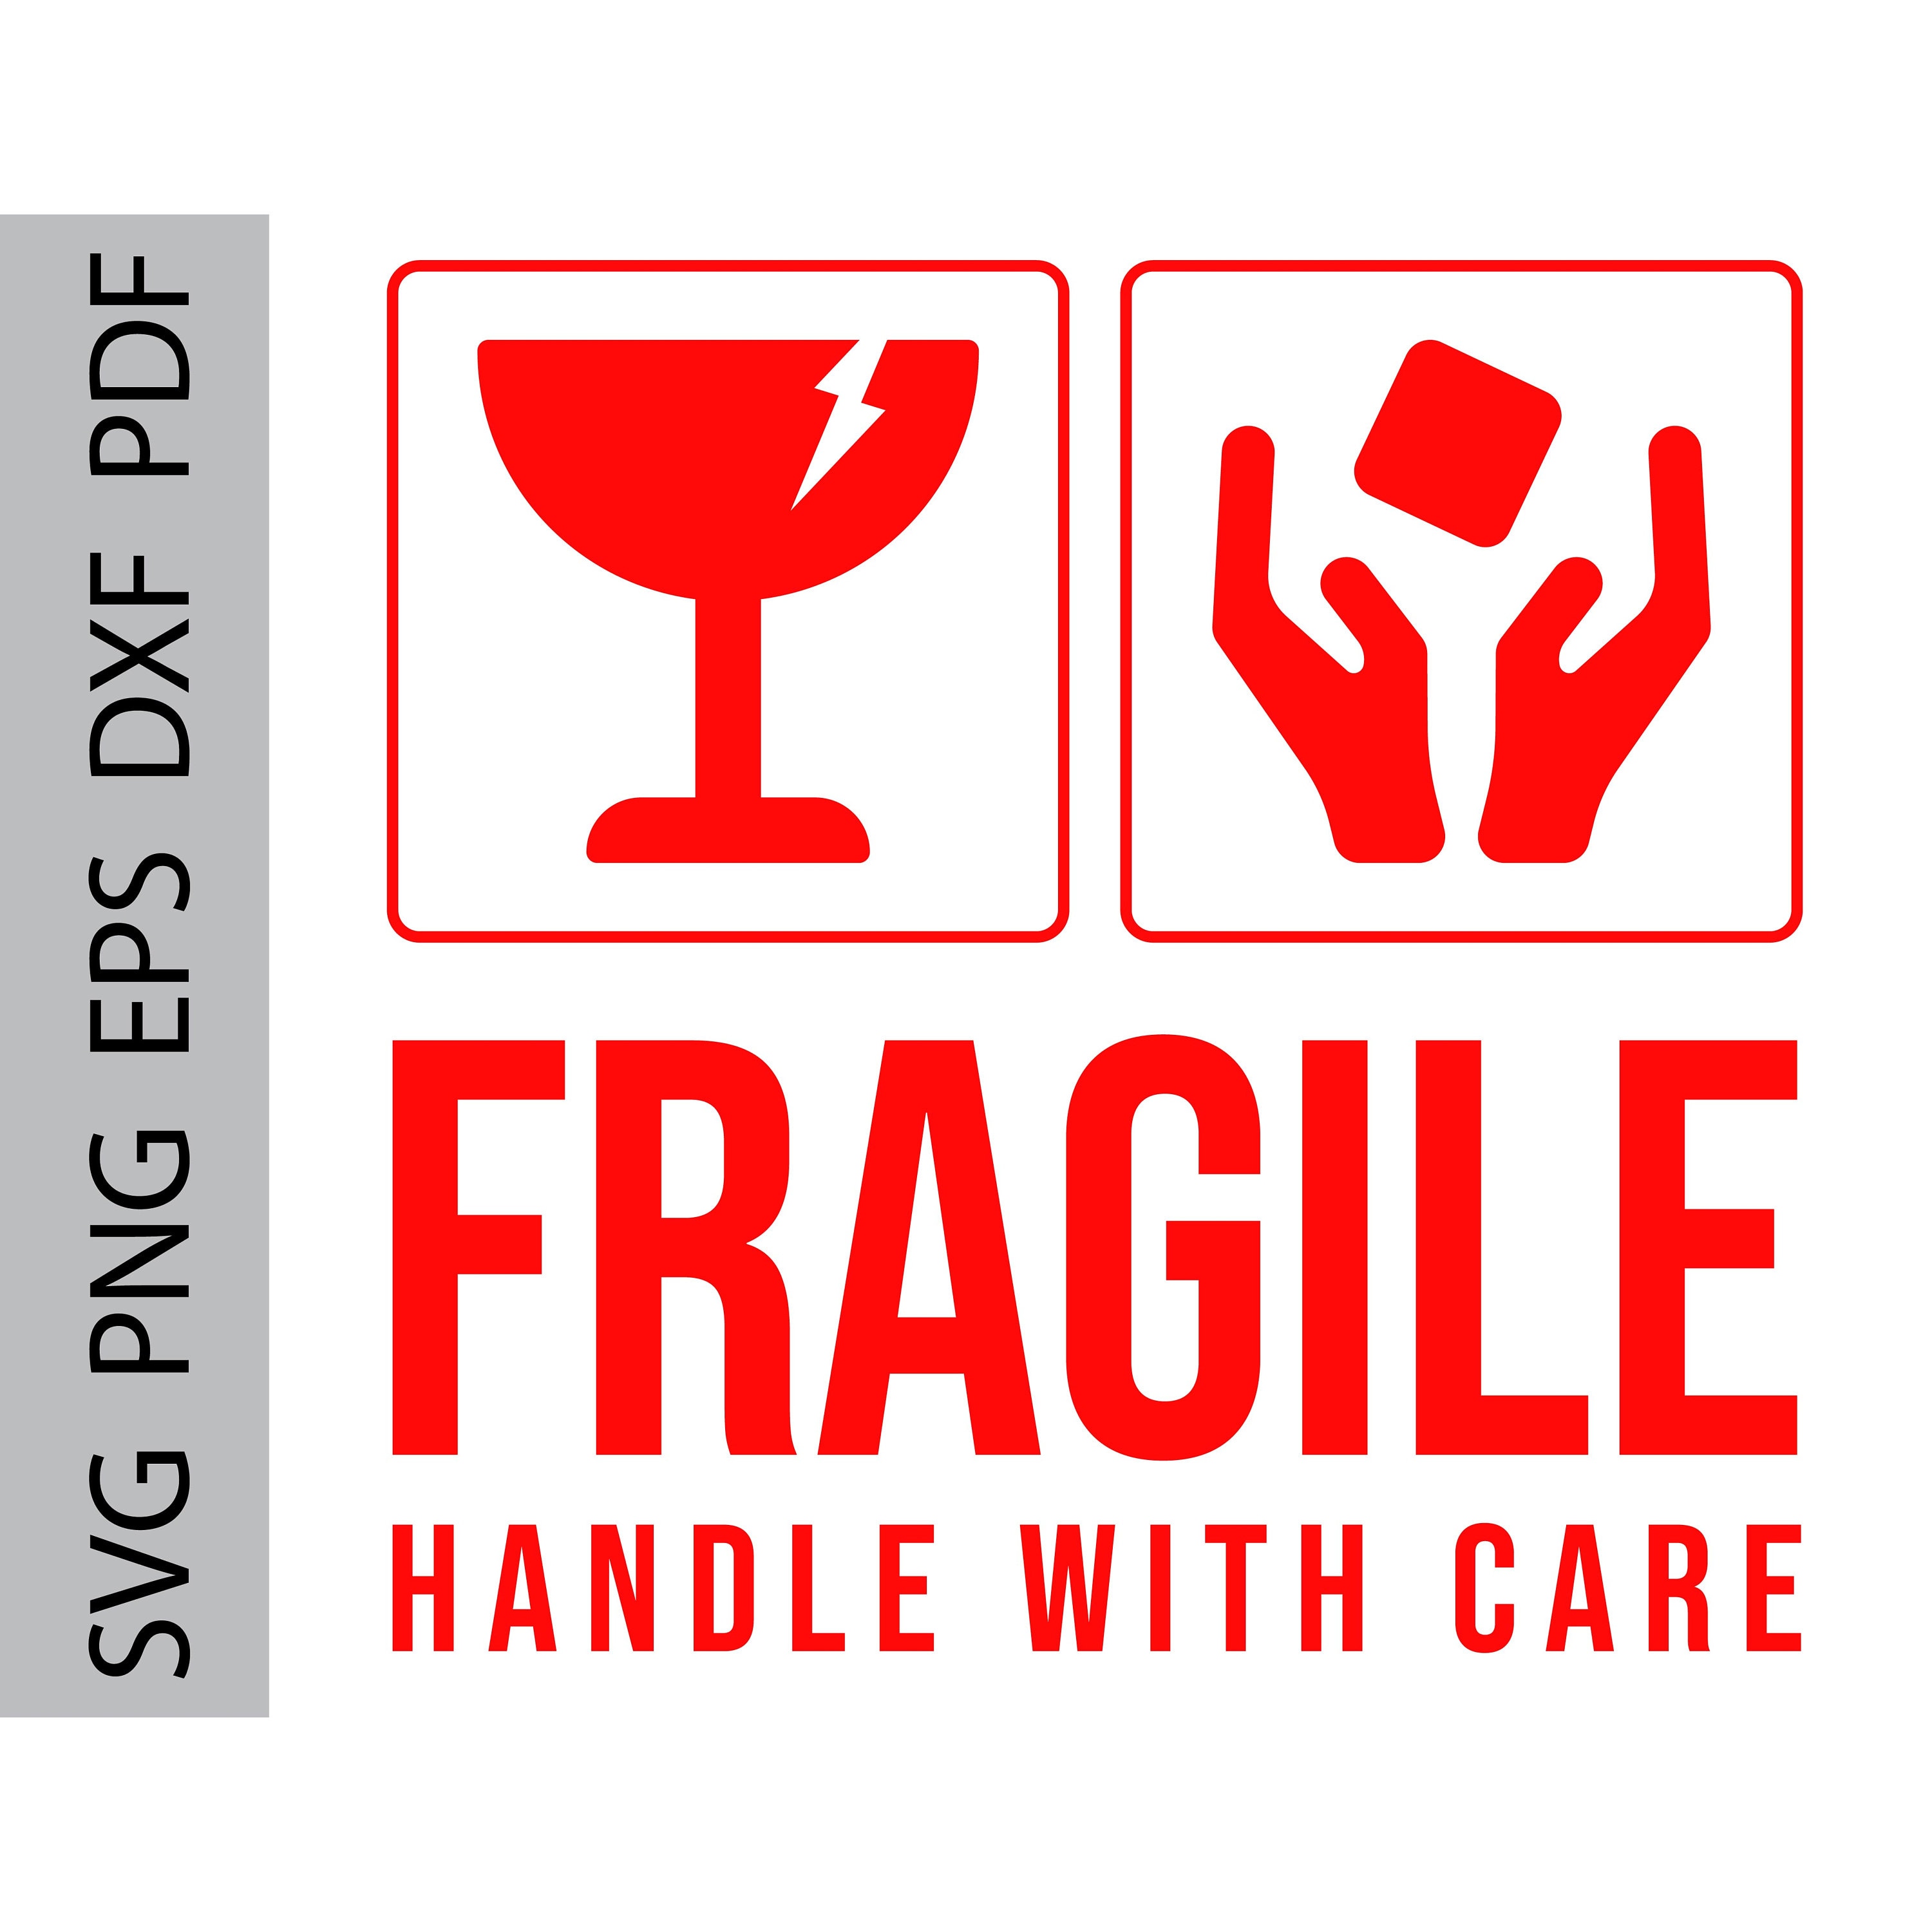 Fragile Sign Svg Handle With Care Fragile Handle With Care Etsy Hong Kong